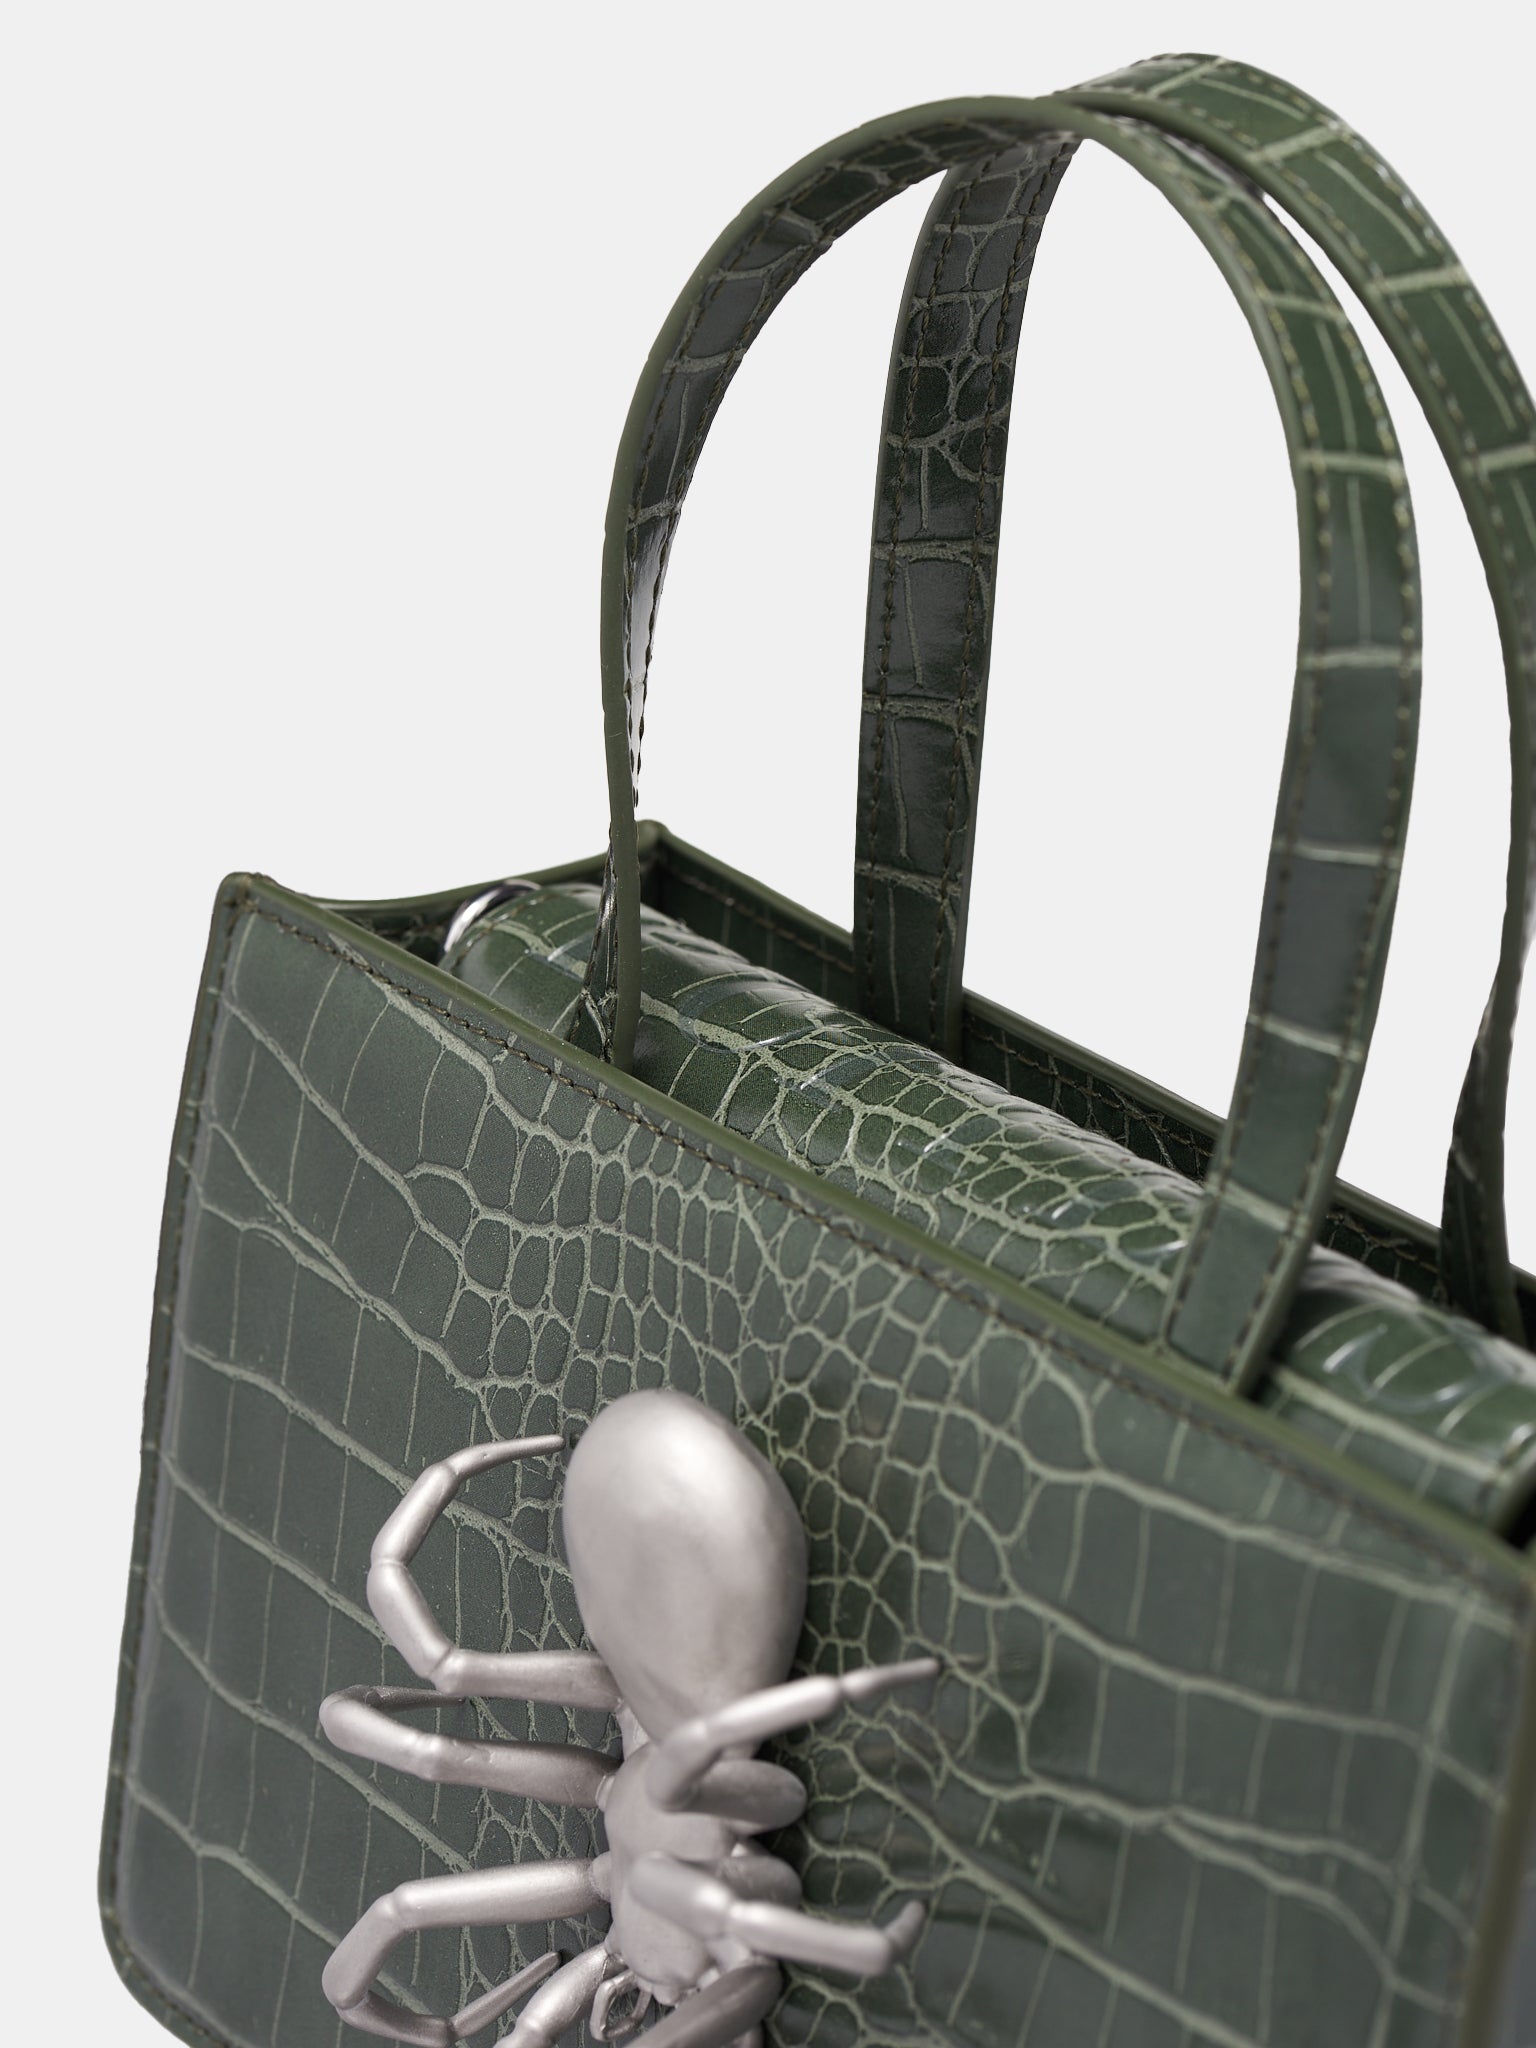 Small Spider Bag (HBSMC012-OLIVE)